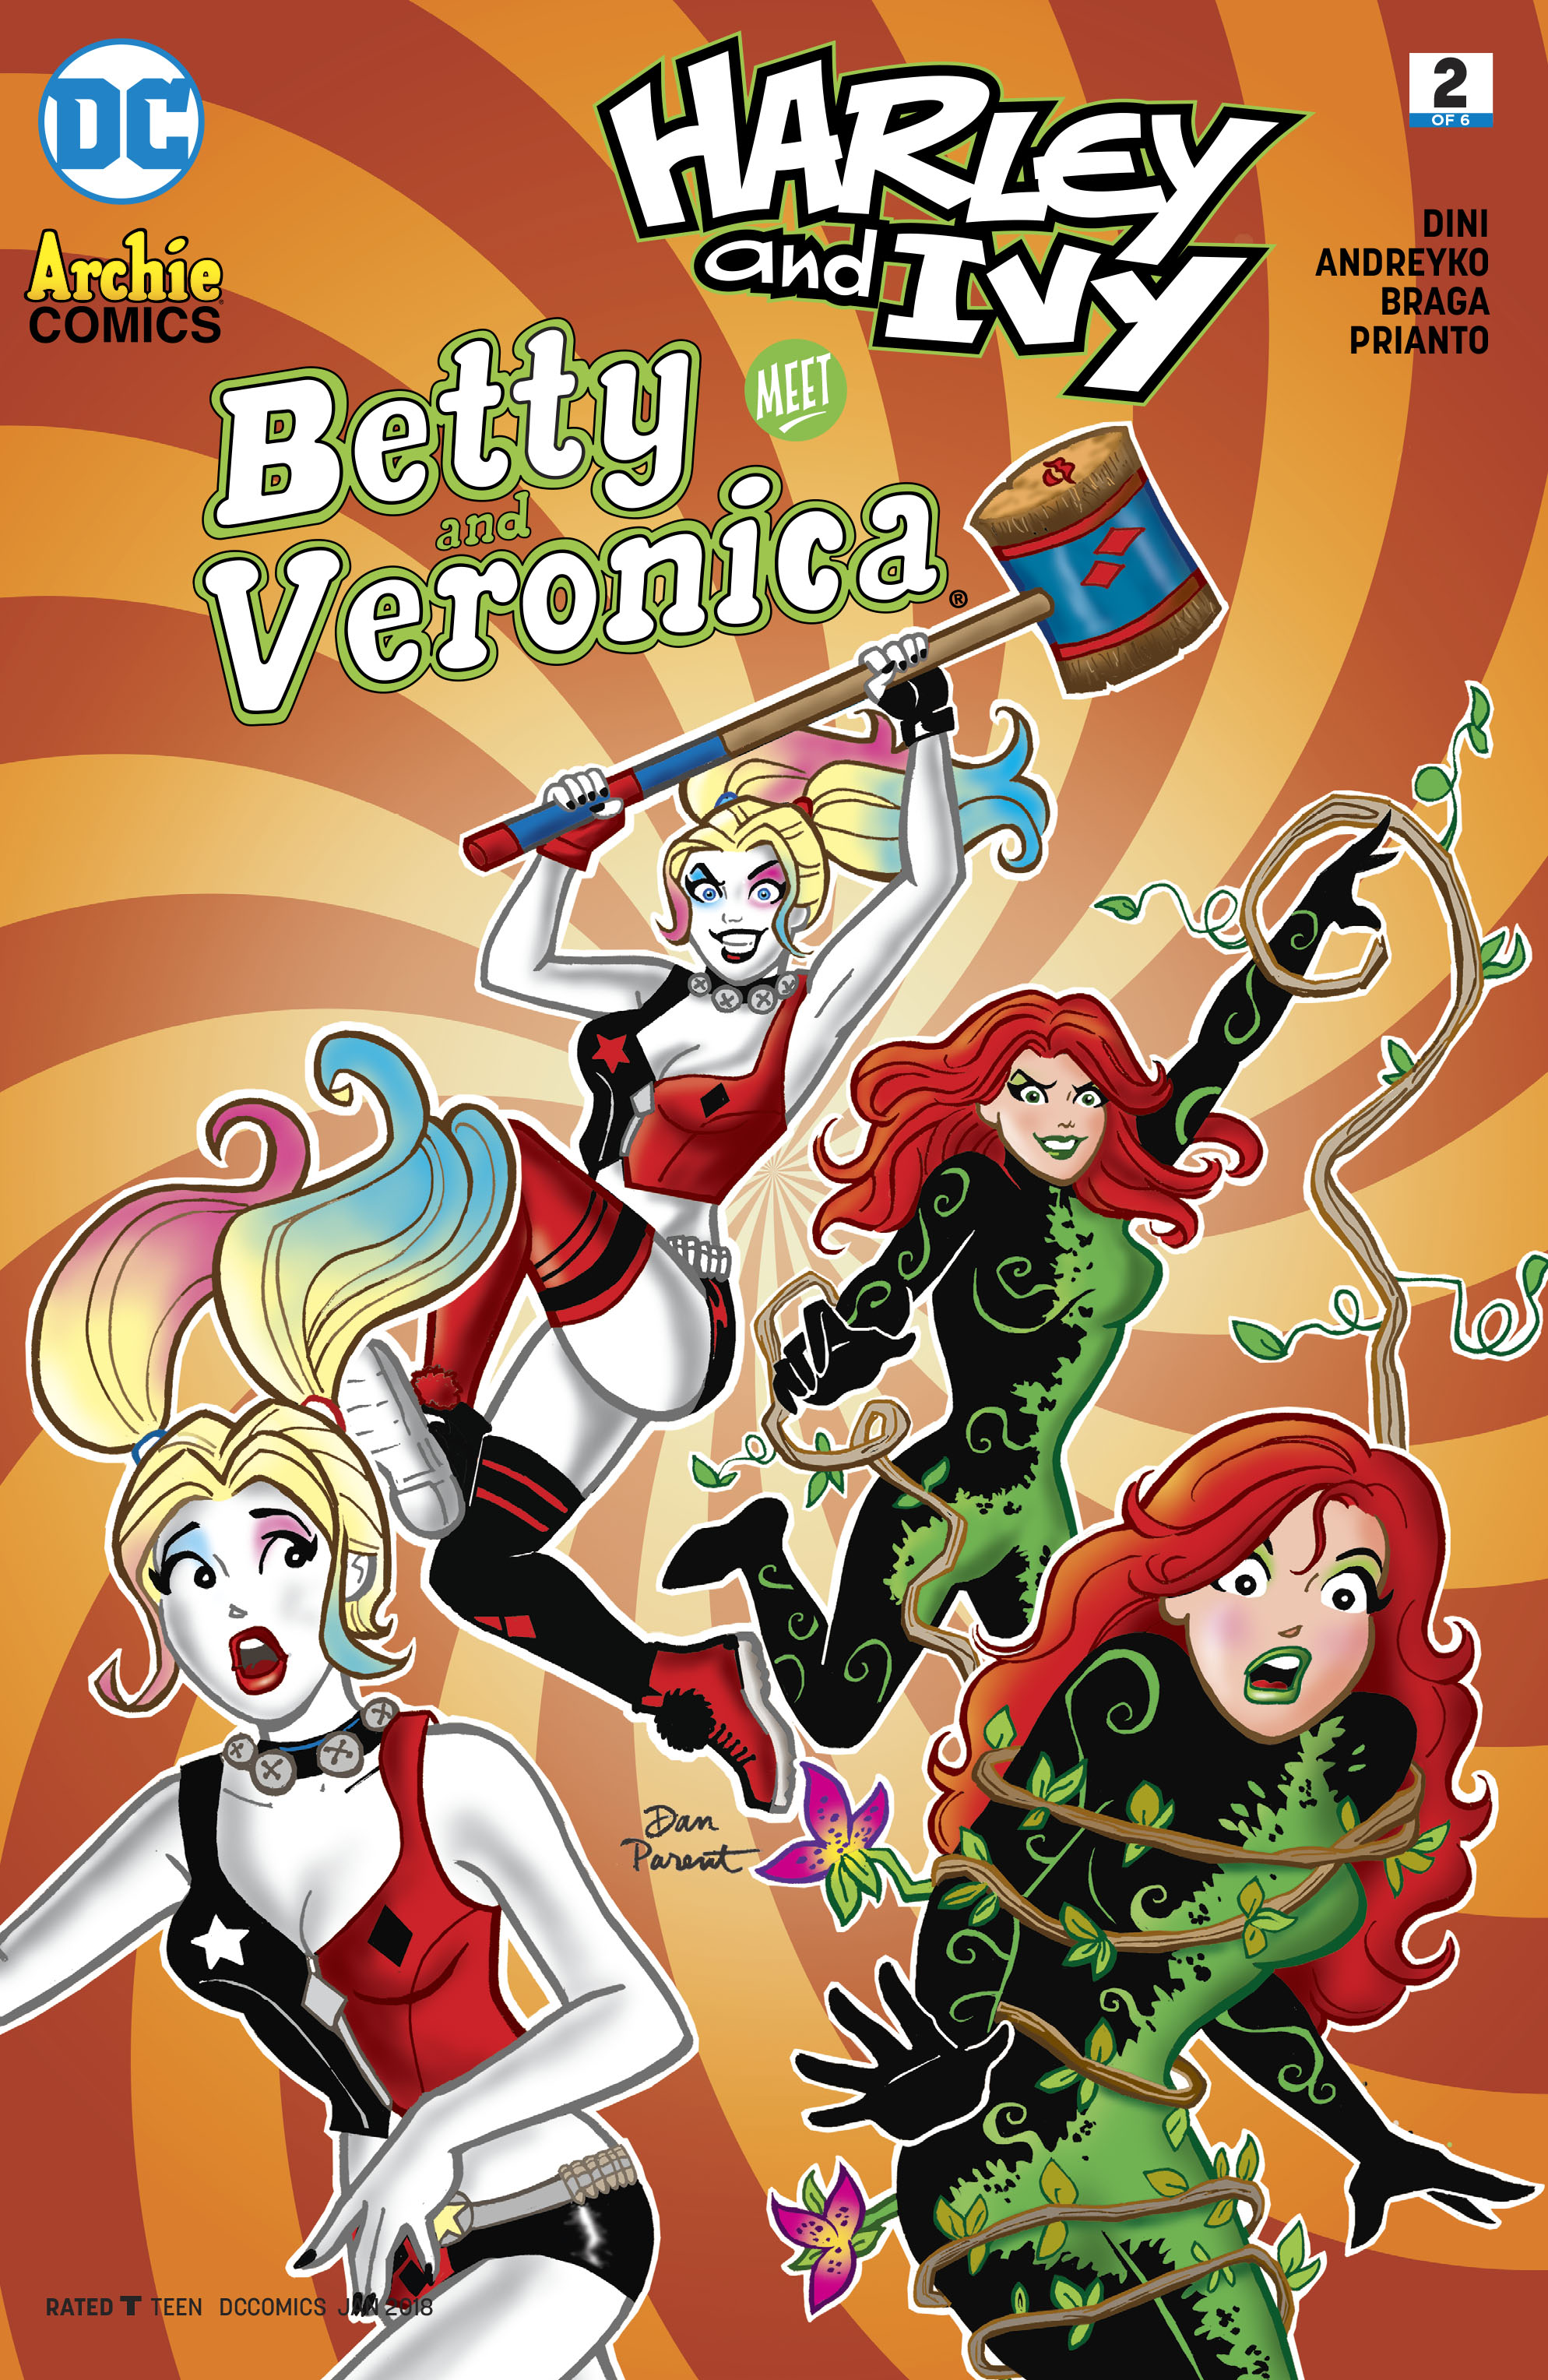 Harley & Ivy Meet Betty and Veronica (2017-): Chapter 2 - Page 3